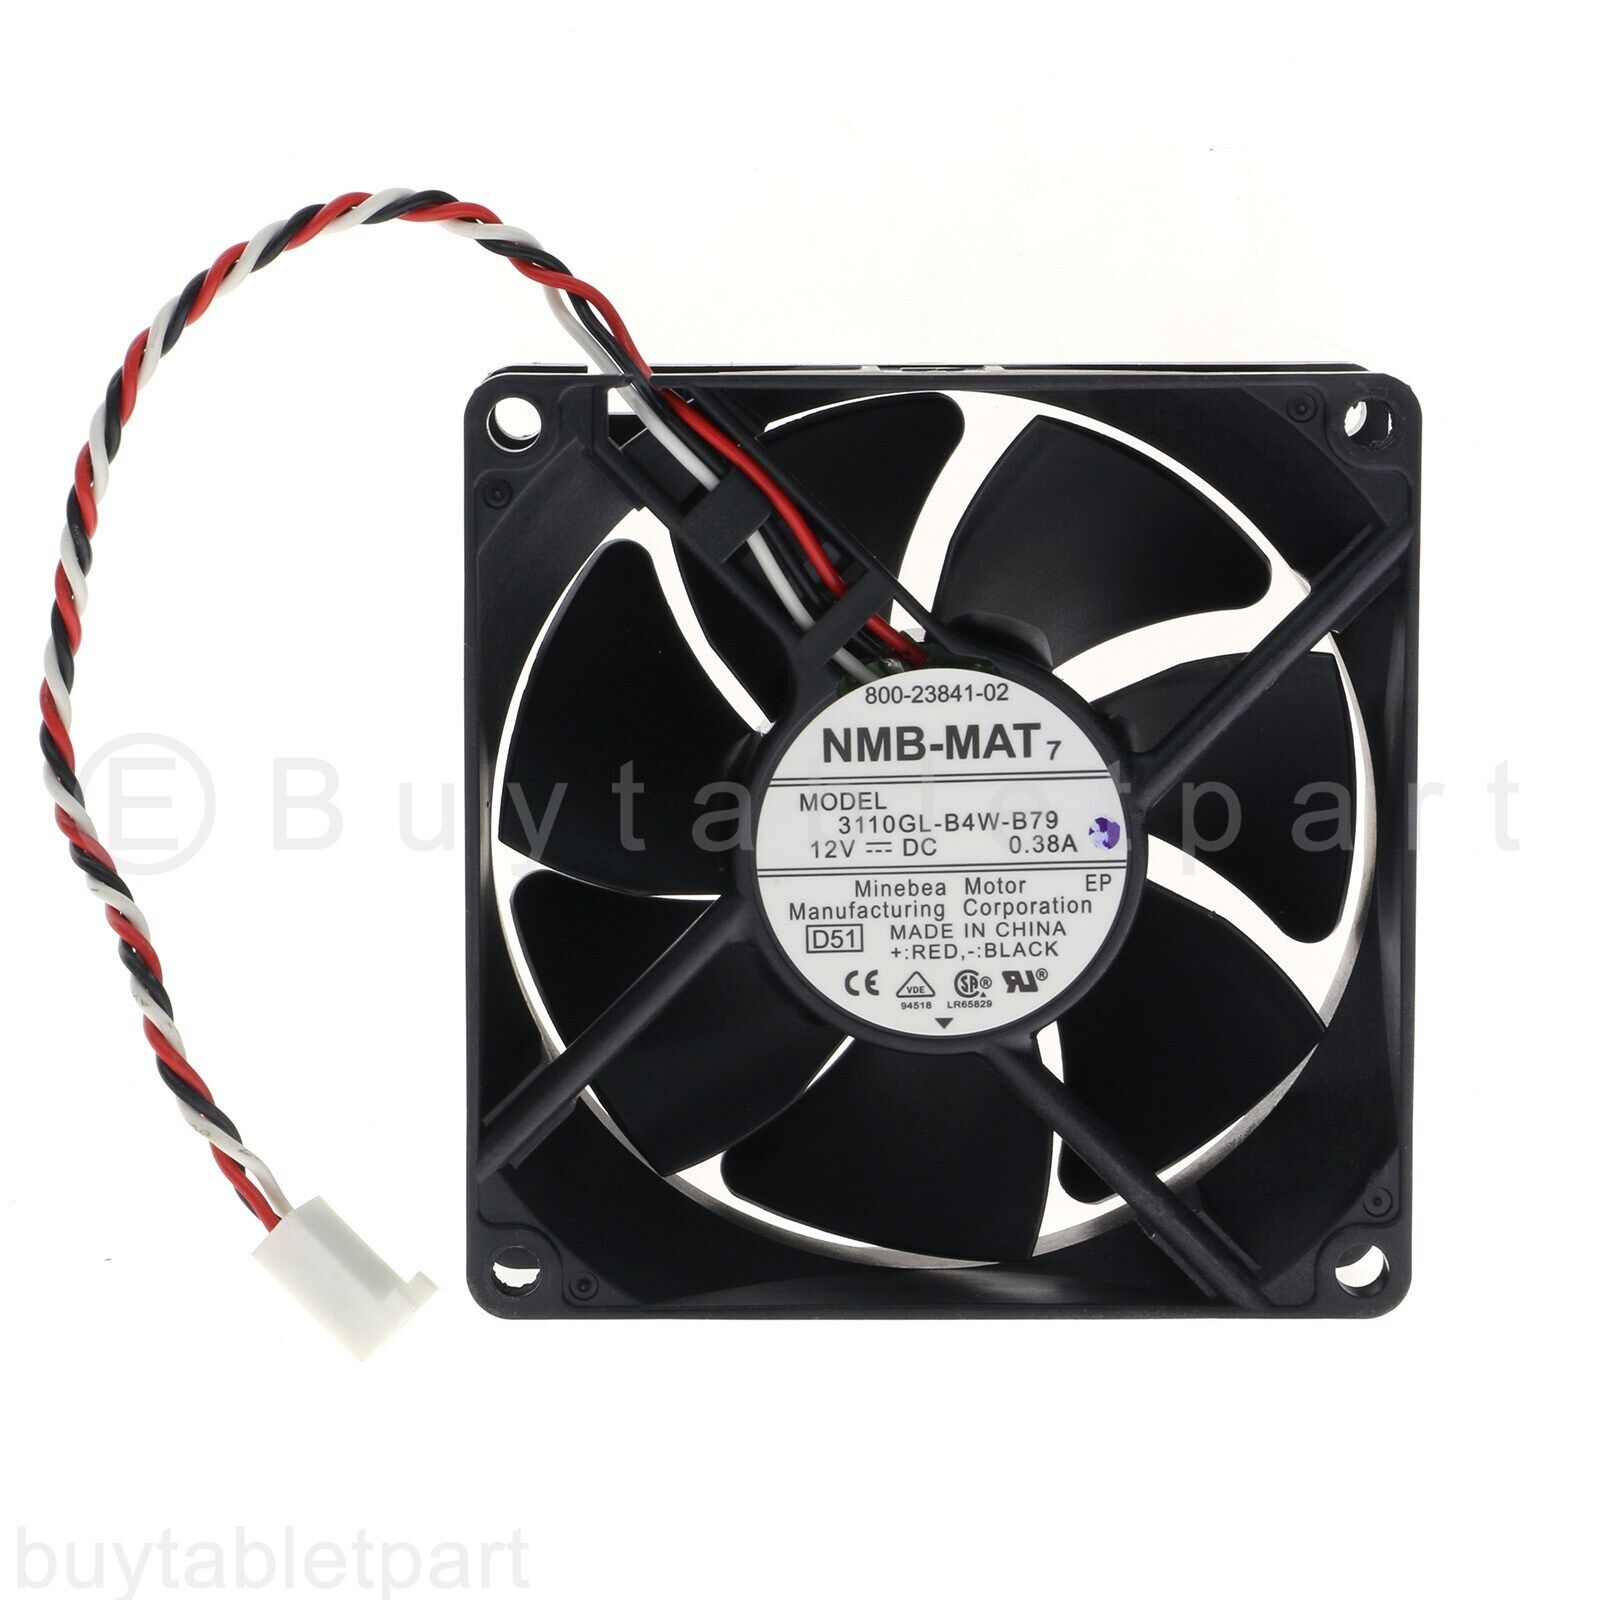 NEW Replacement Cooling Fan For Cisco 2821 2851 3825 Router 800-23841-02